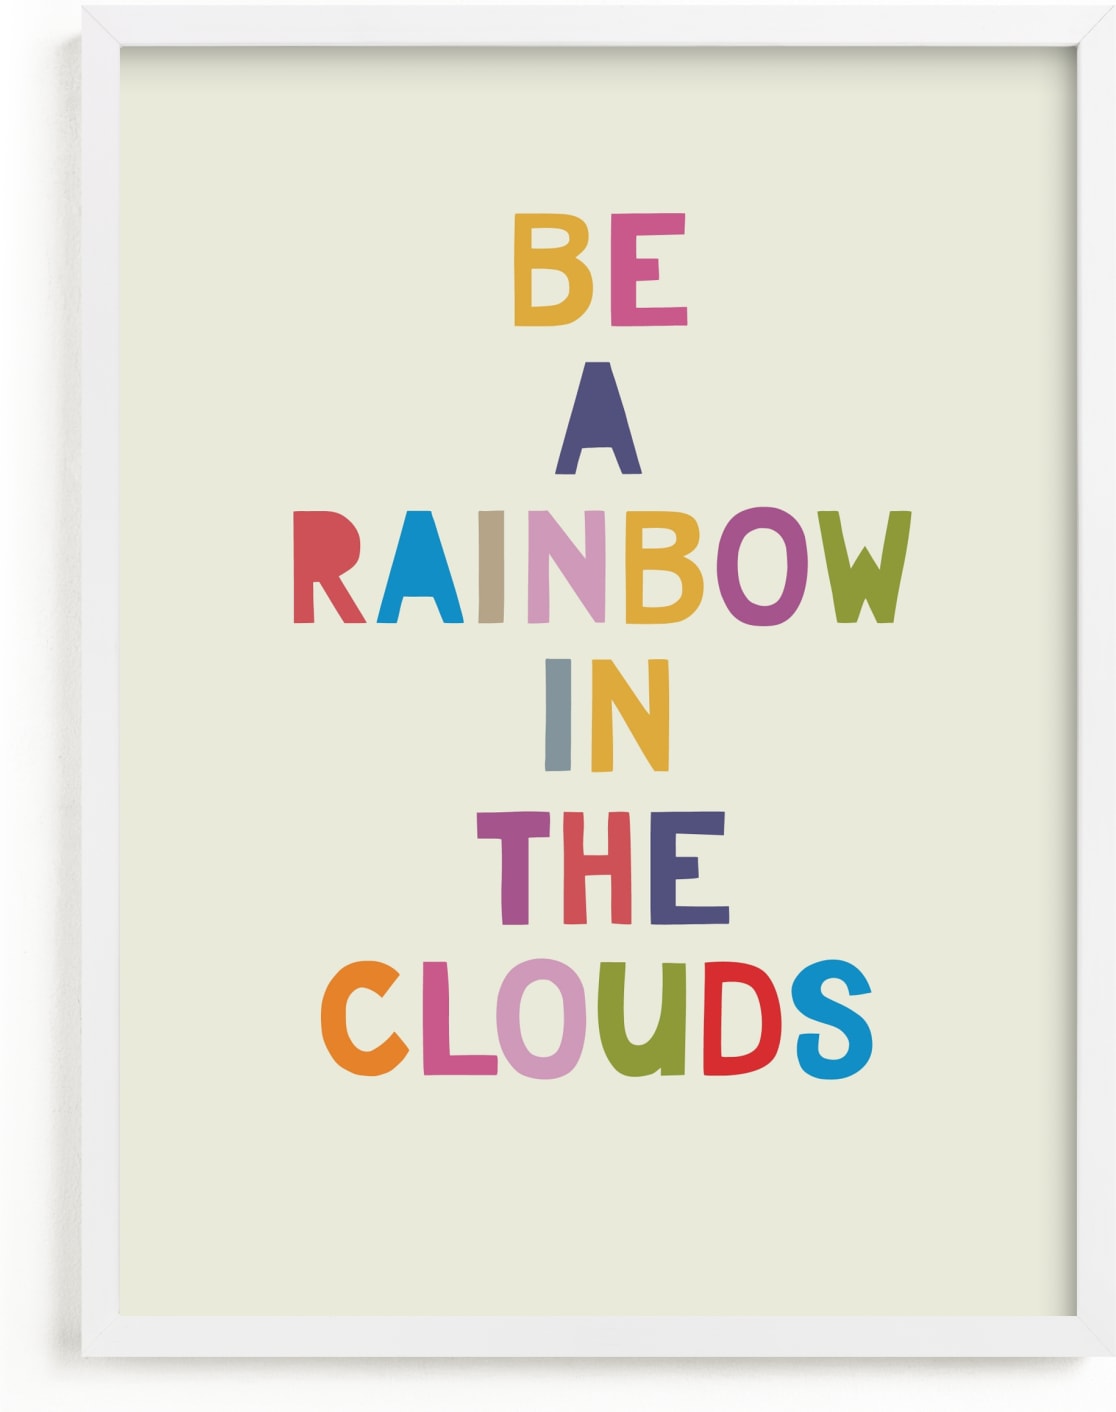 This is a colorful art by Johanna McShan called Rainbow in a Cloud.